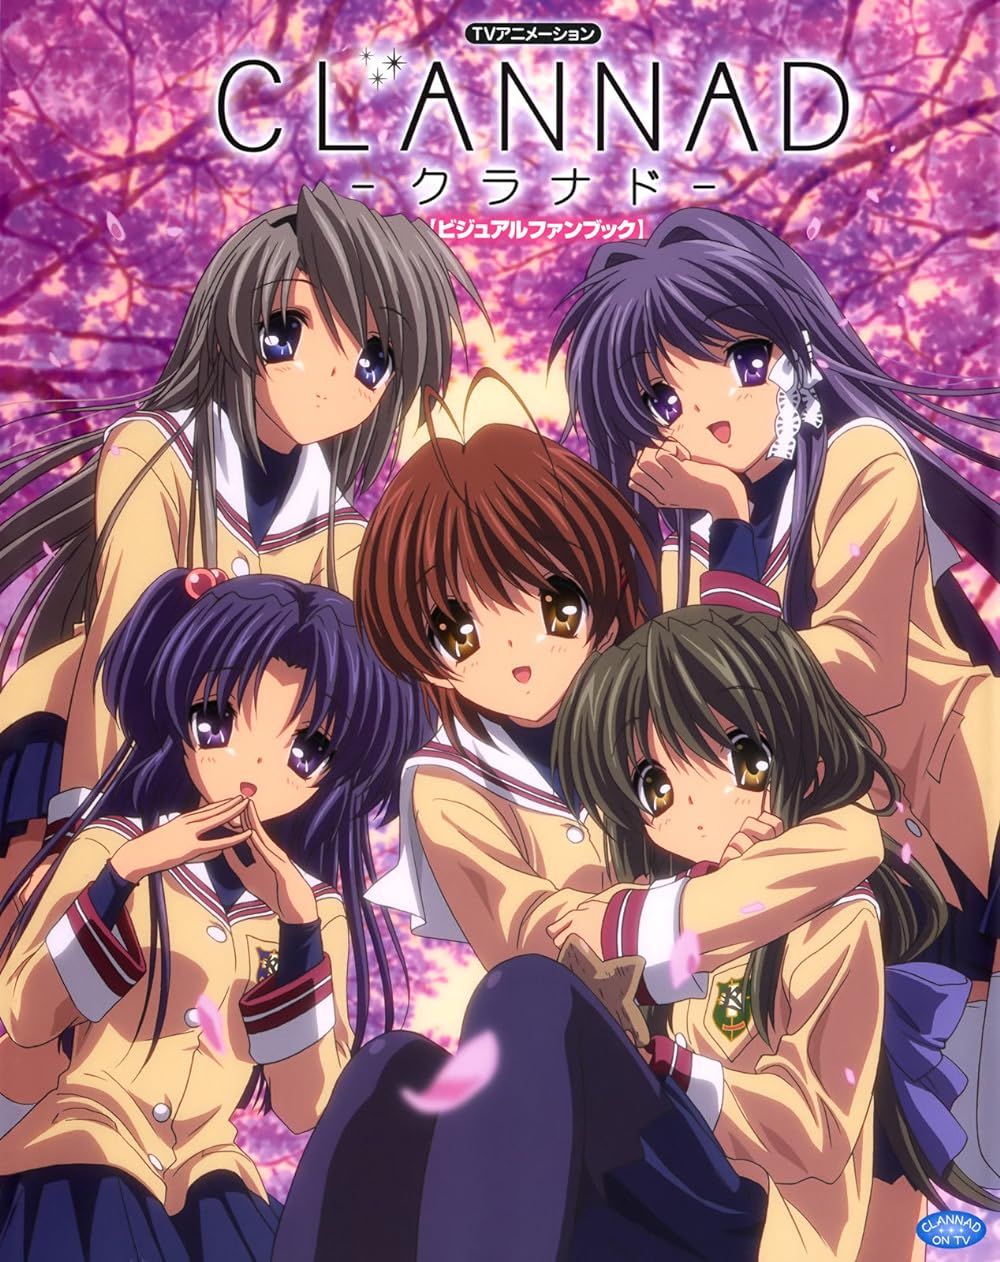 The Cast of Clannad Stares at the Viewer